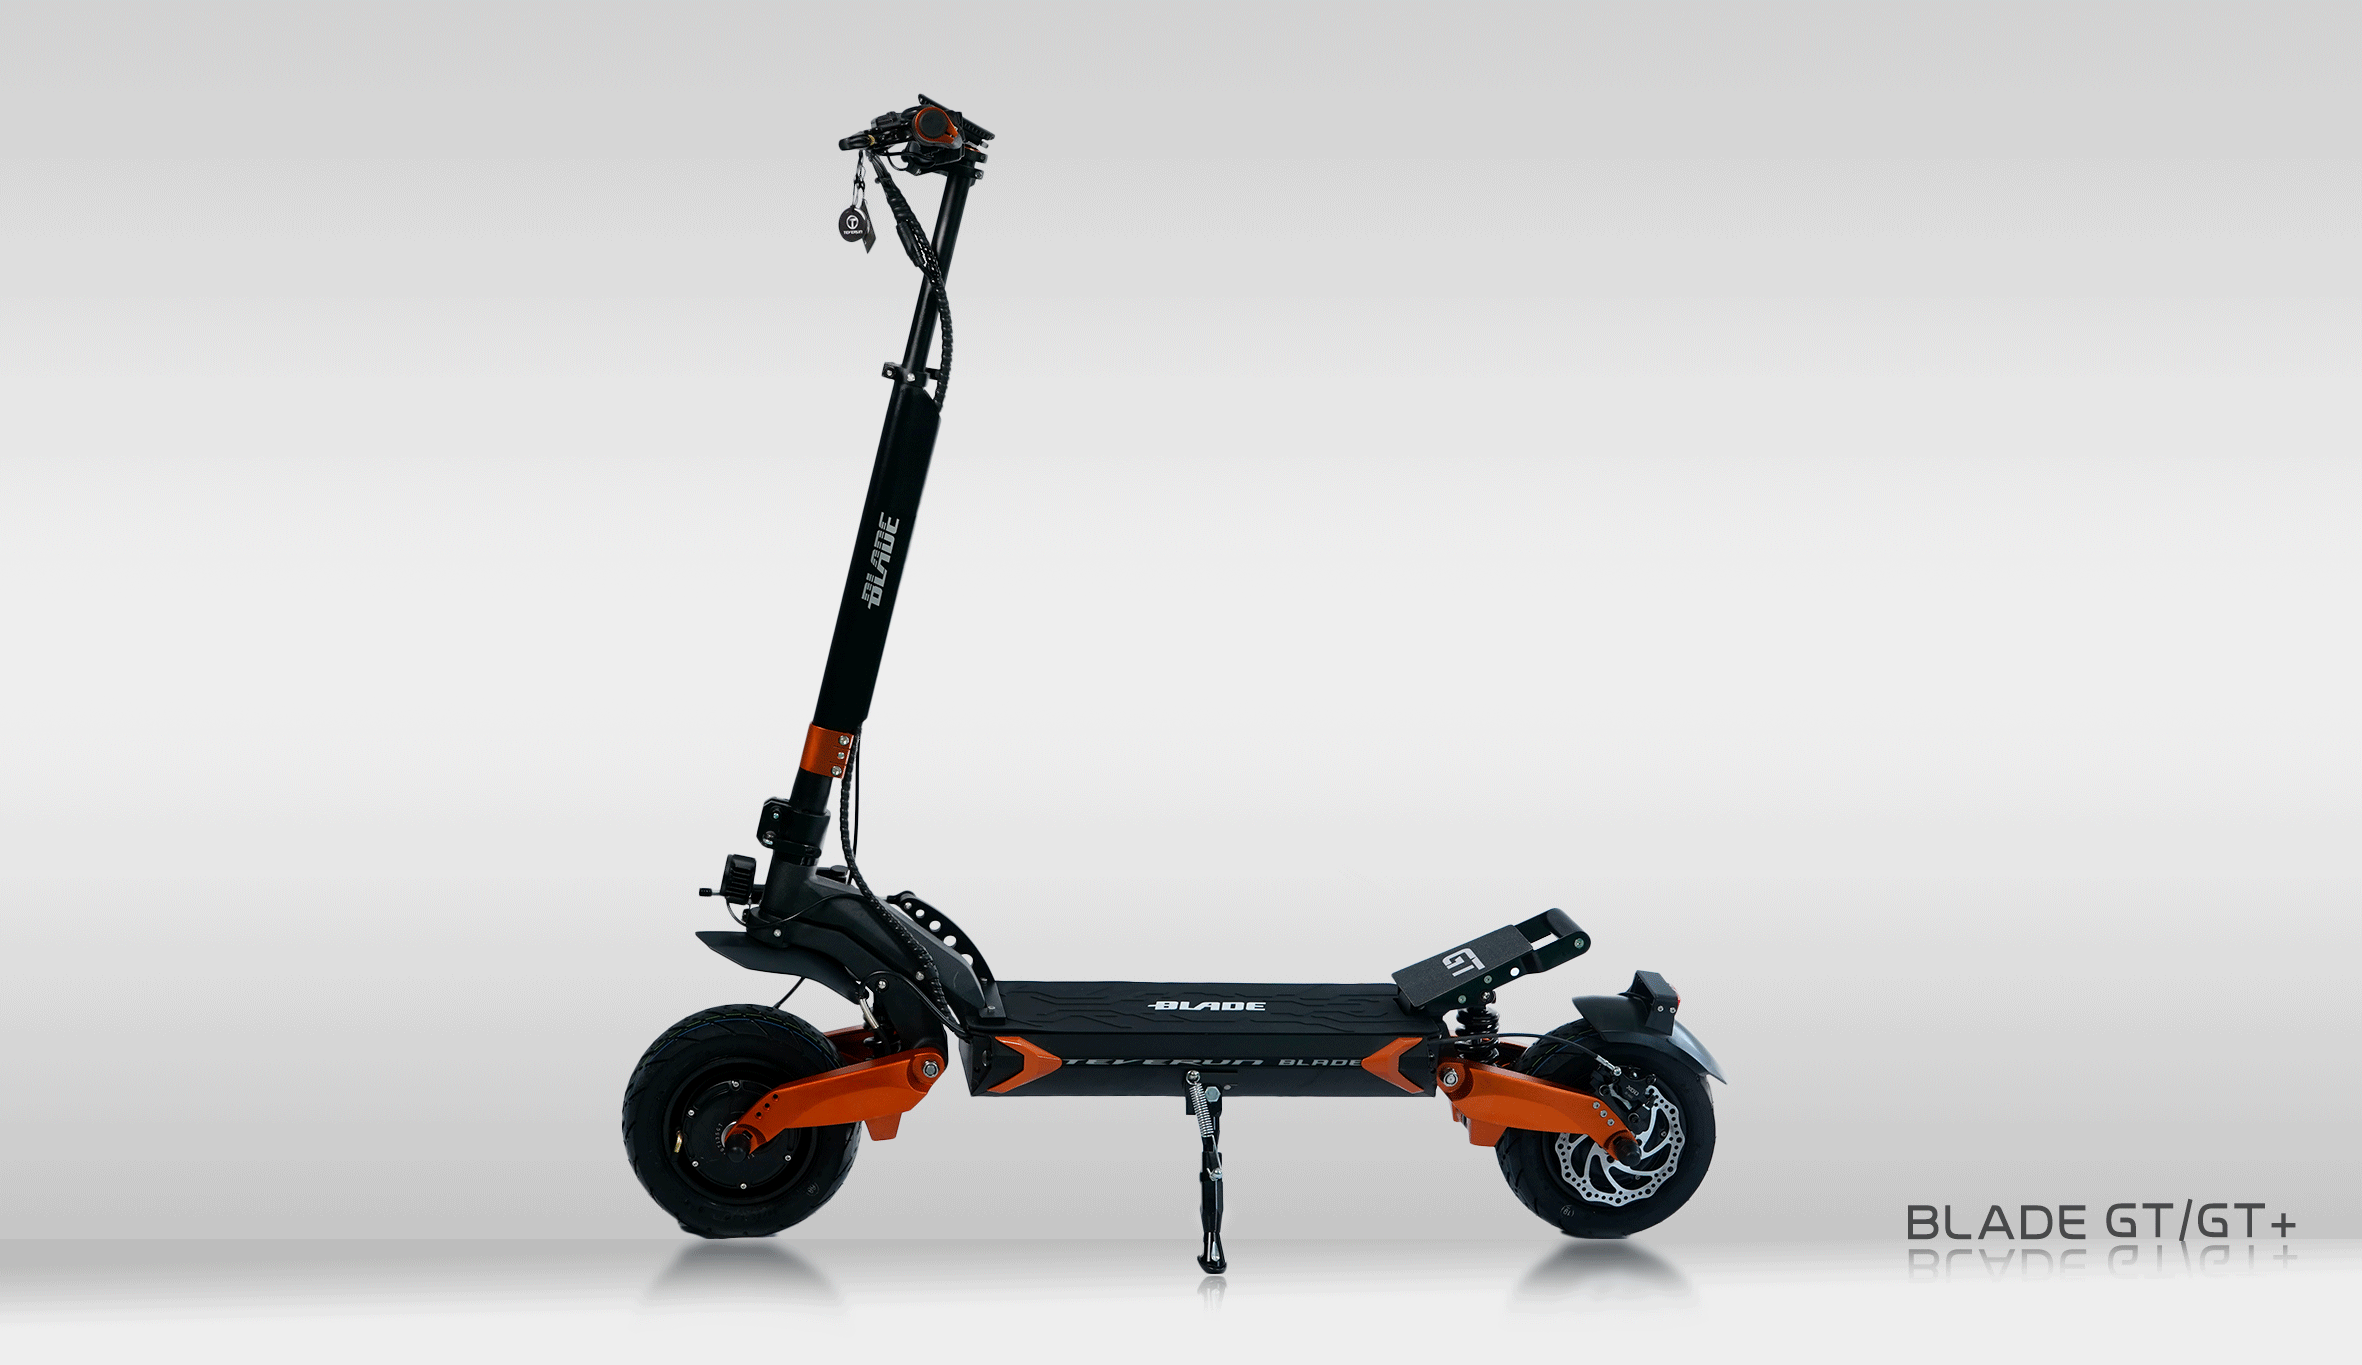 The All-New BLADE GT+, an Electric Scooter Capable of +50 Miles per Hour -